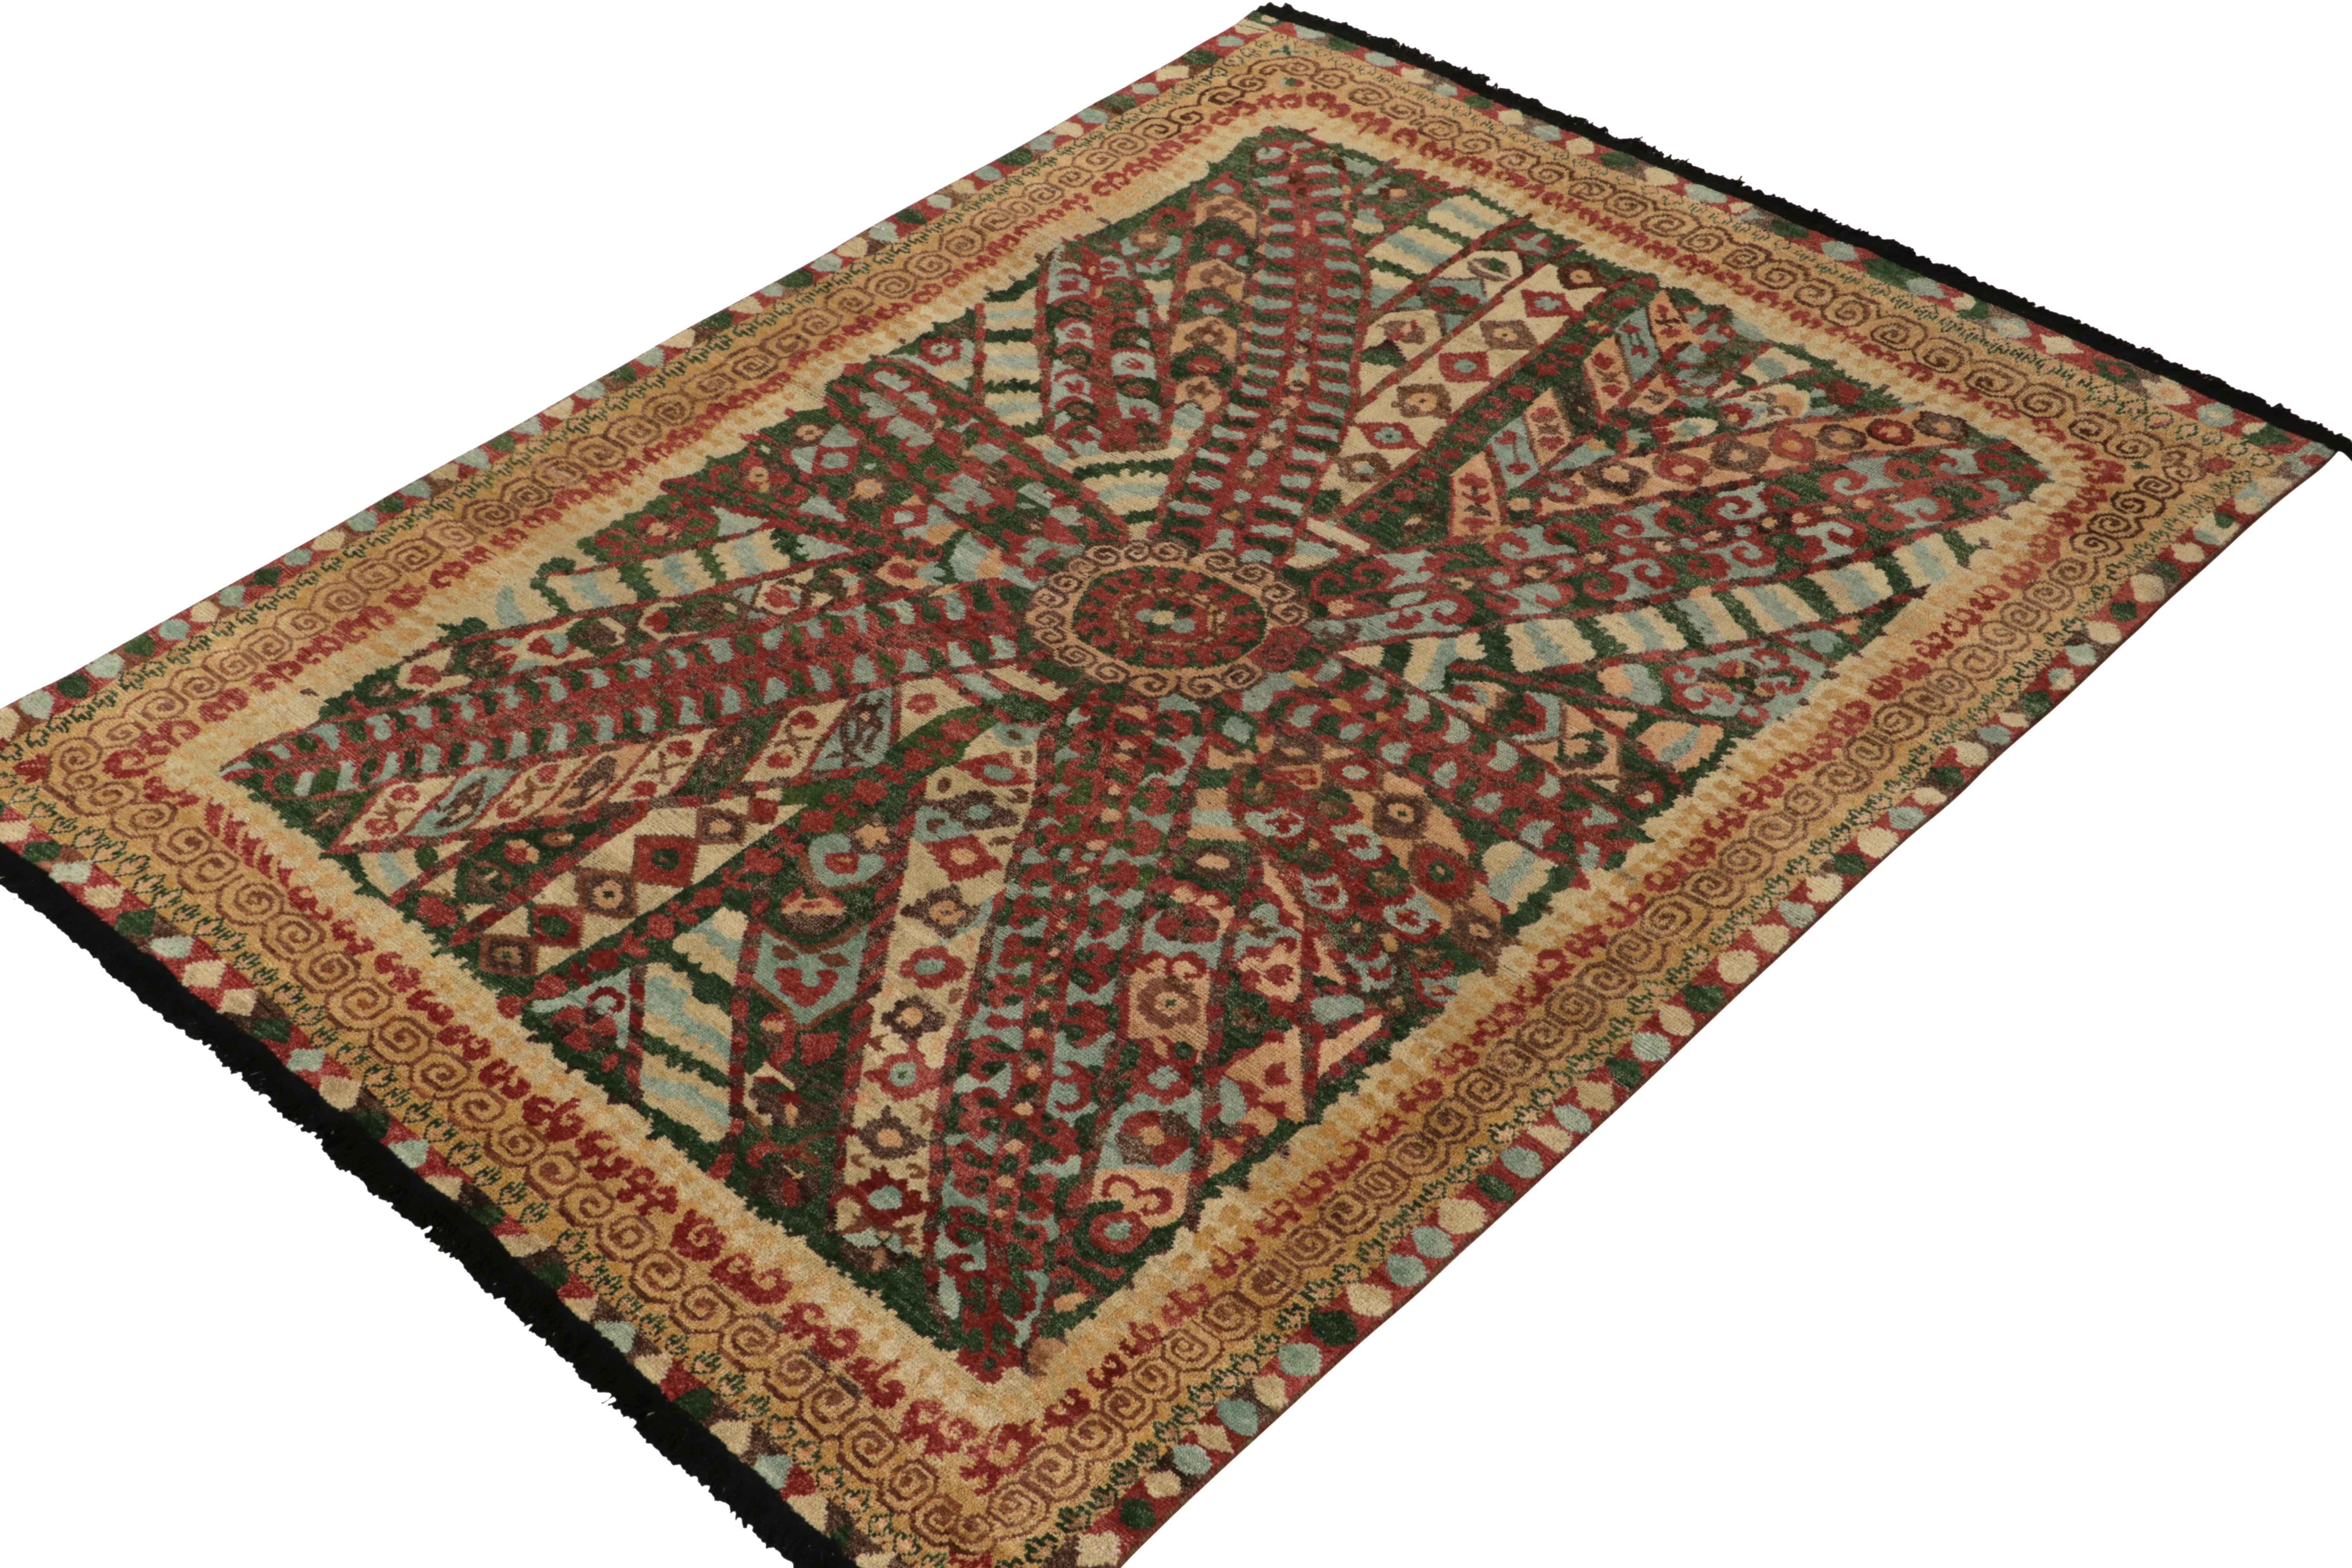 Indian Rug & Kilim's Tribal Style Rug in Red, Green Geometric Pattern and Beige Border For Sale